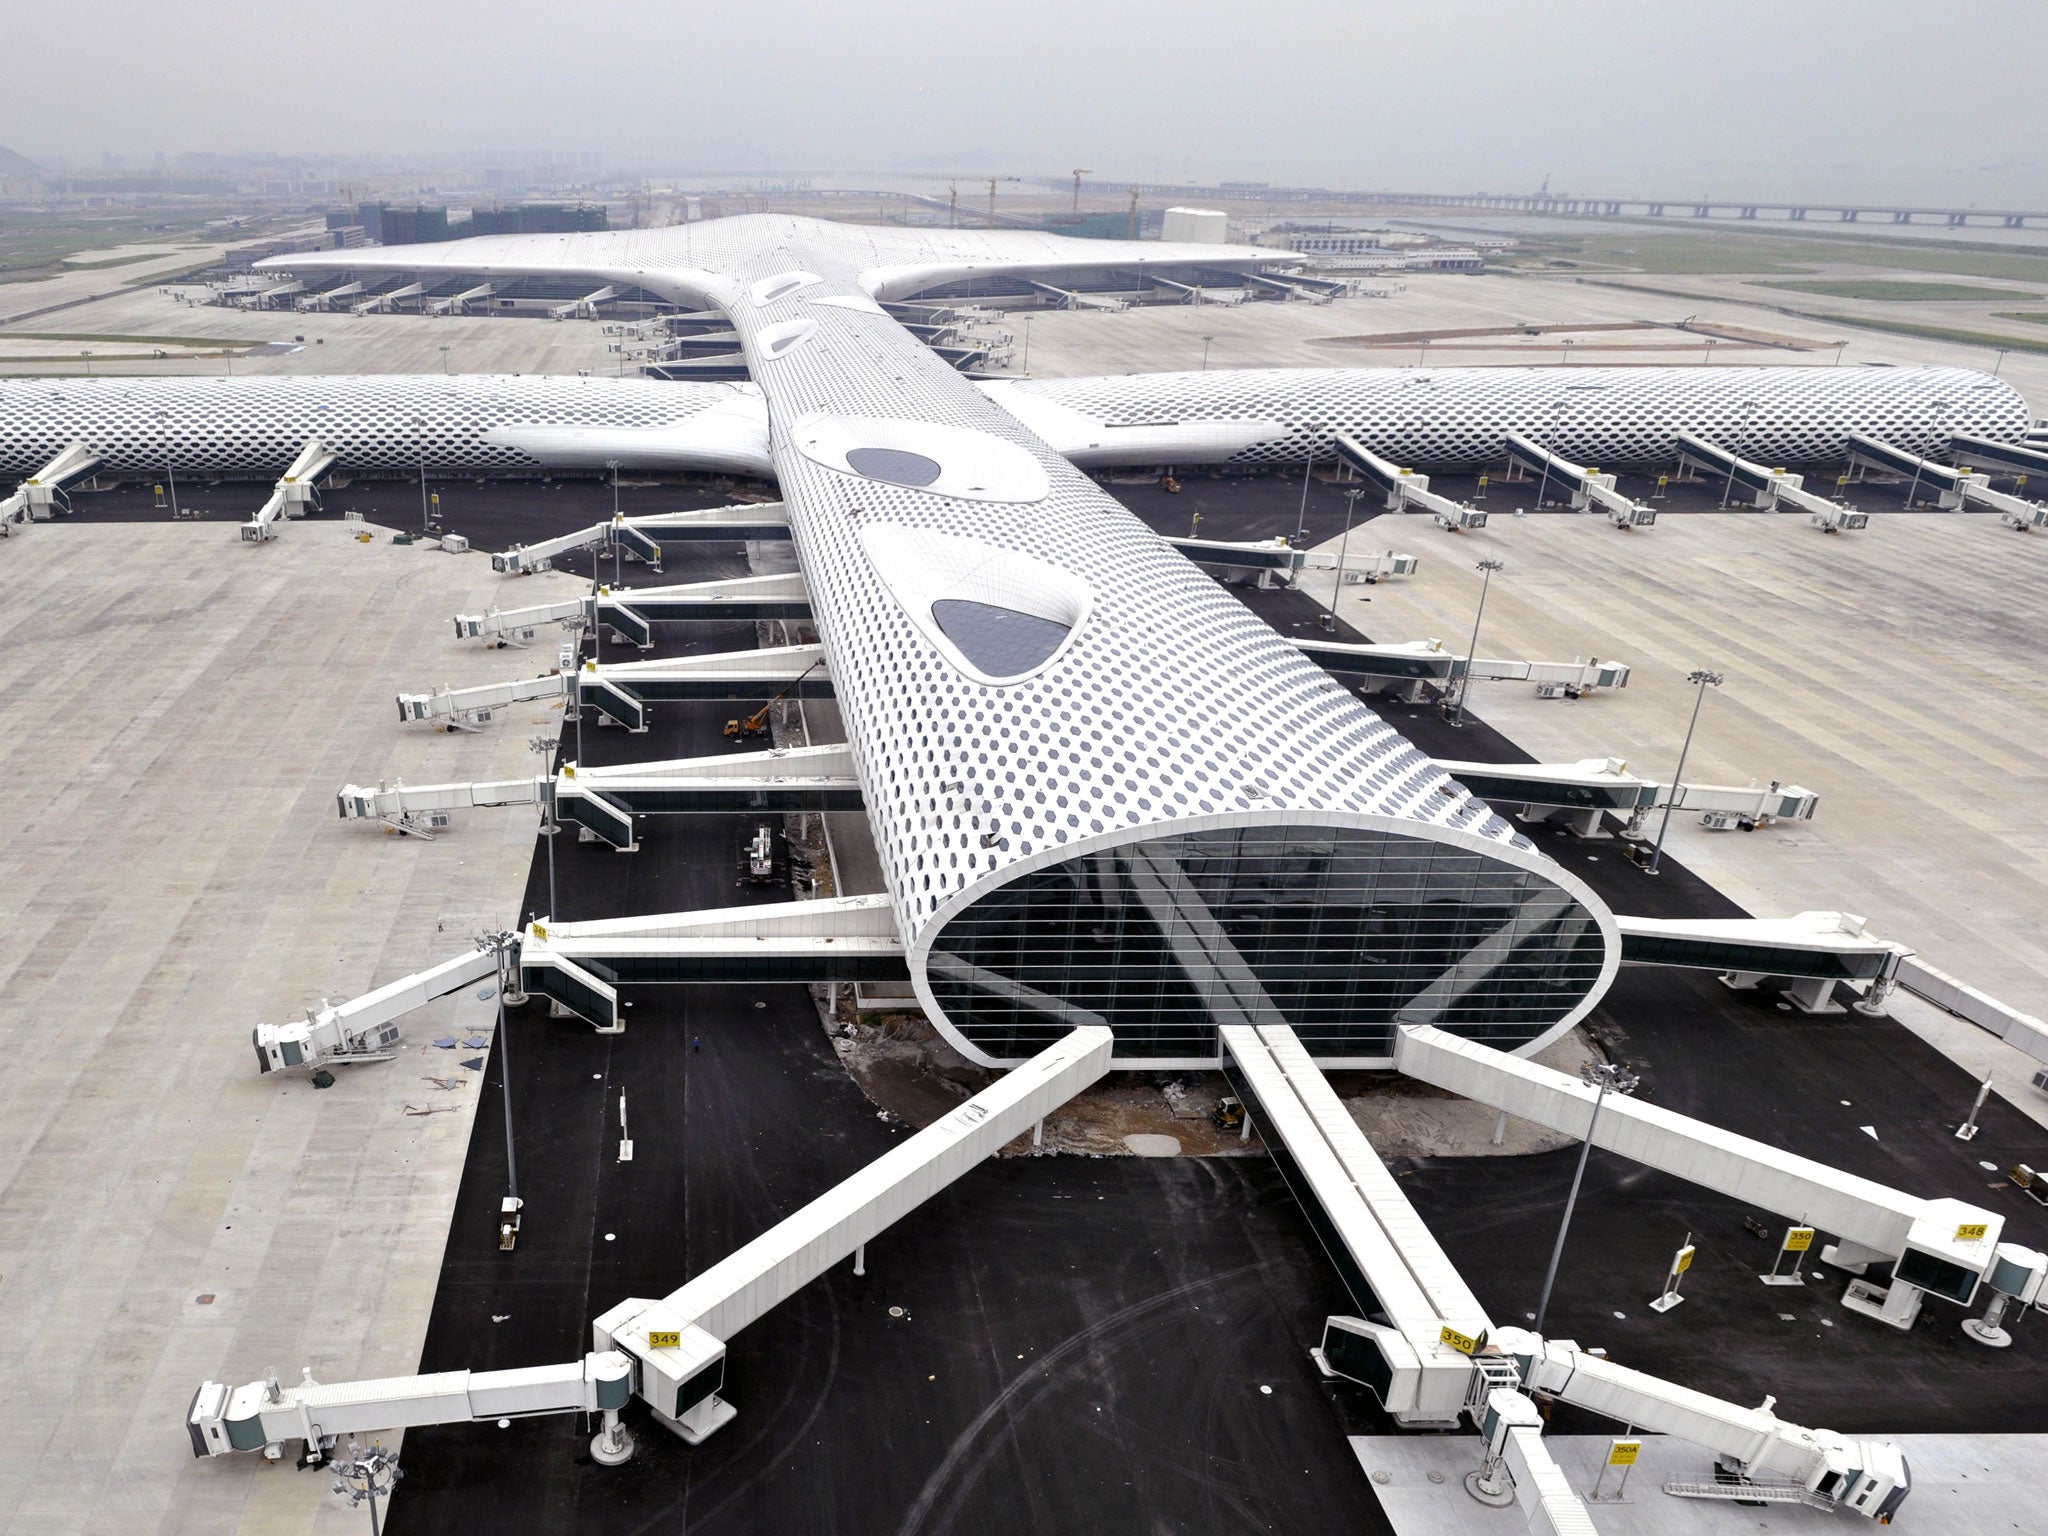 The highly anticipated new terminal at Shenzhen Bao’an International Airport, Guangdong, China has opened